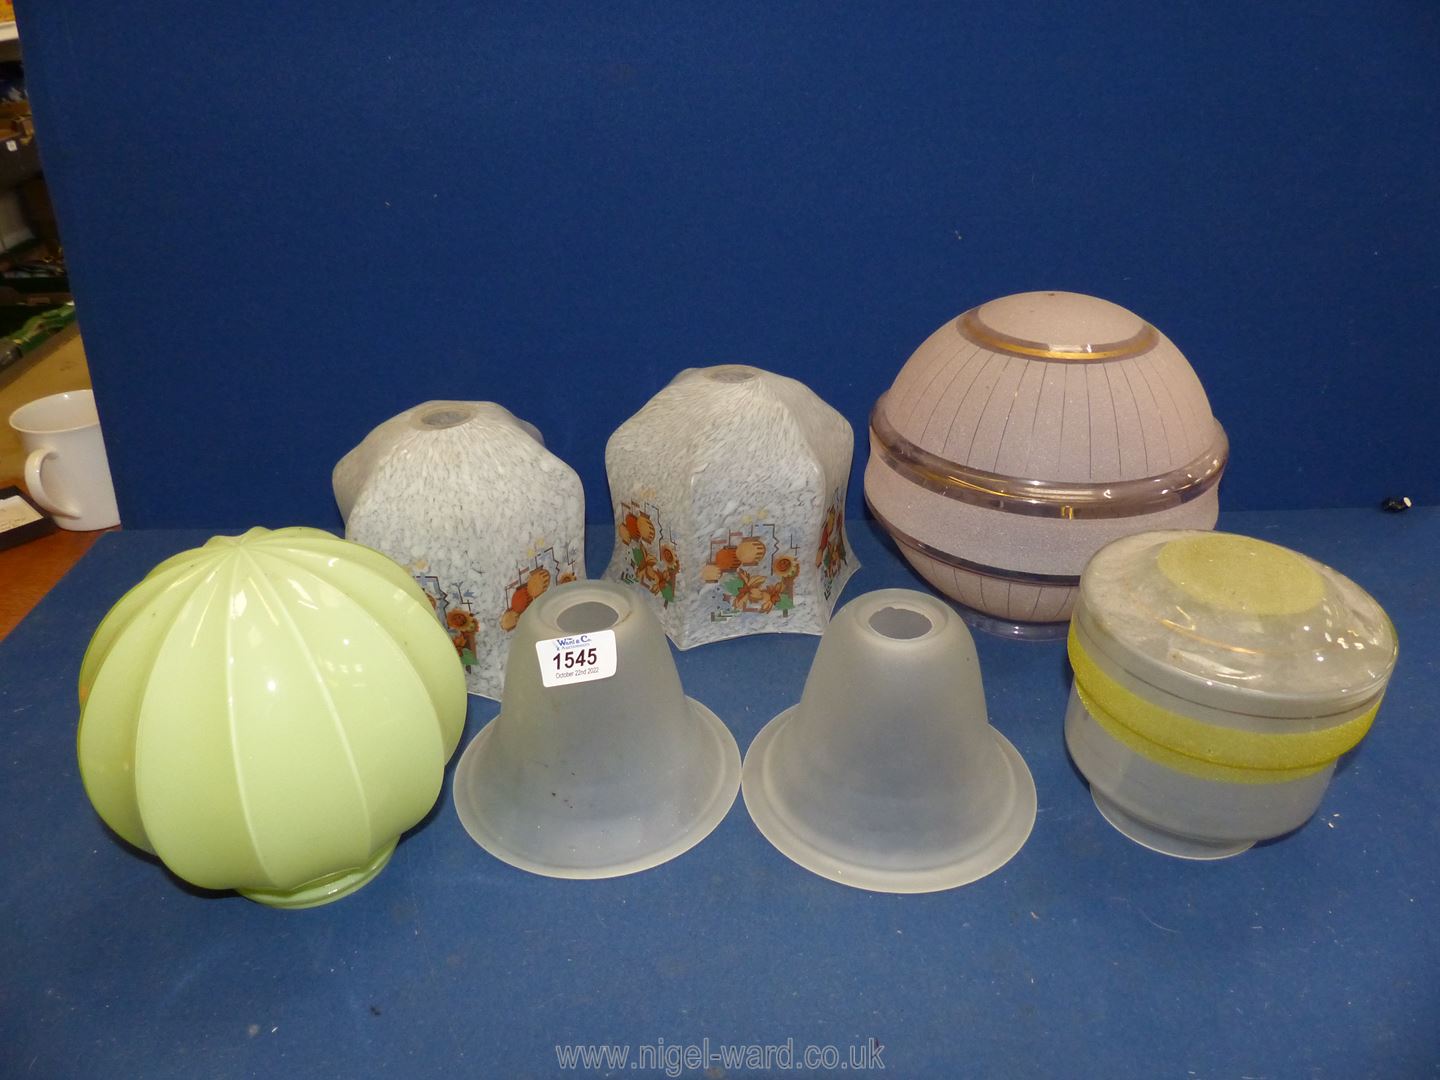 A quantity of coloured glass lampshades including frosted pink, opaque pale green,